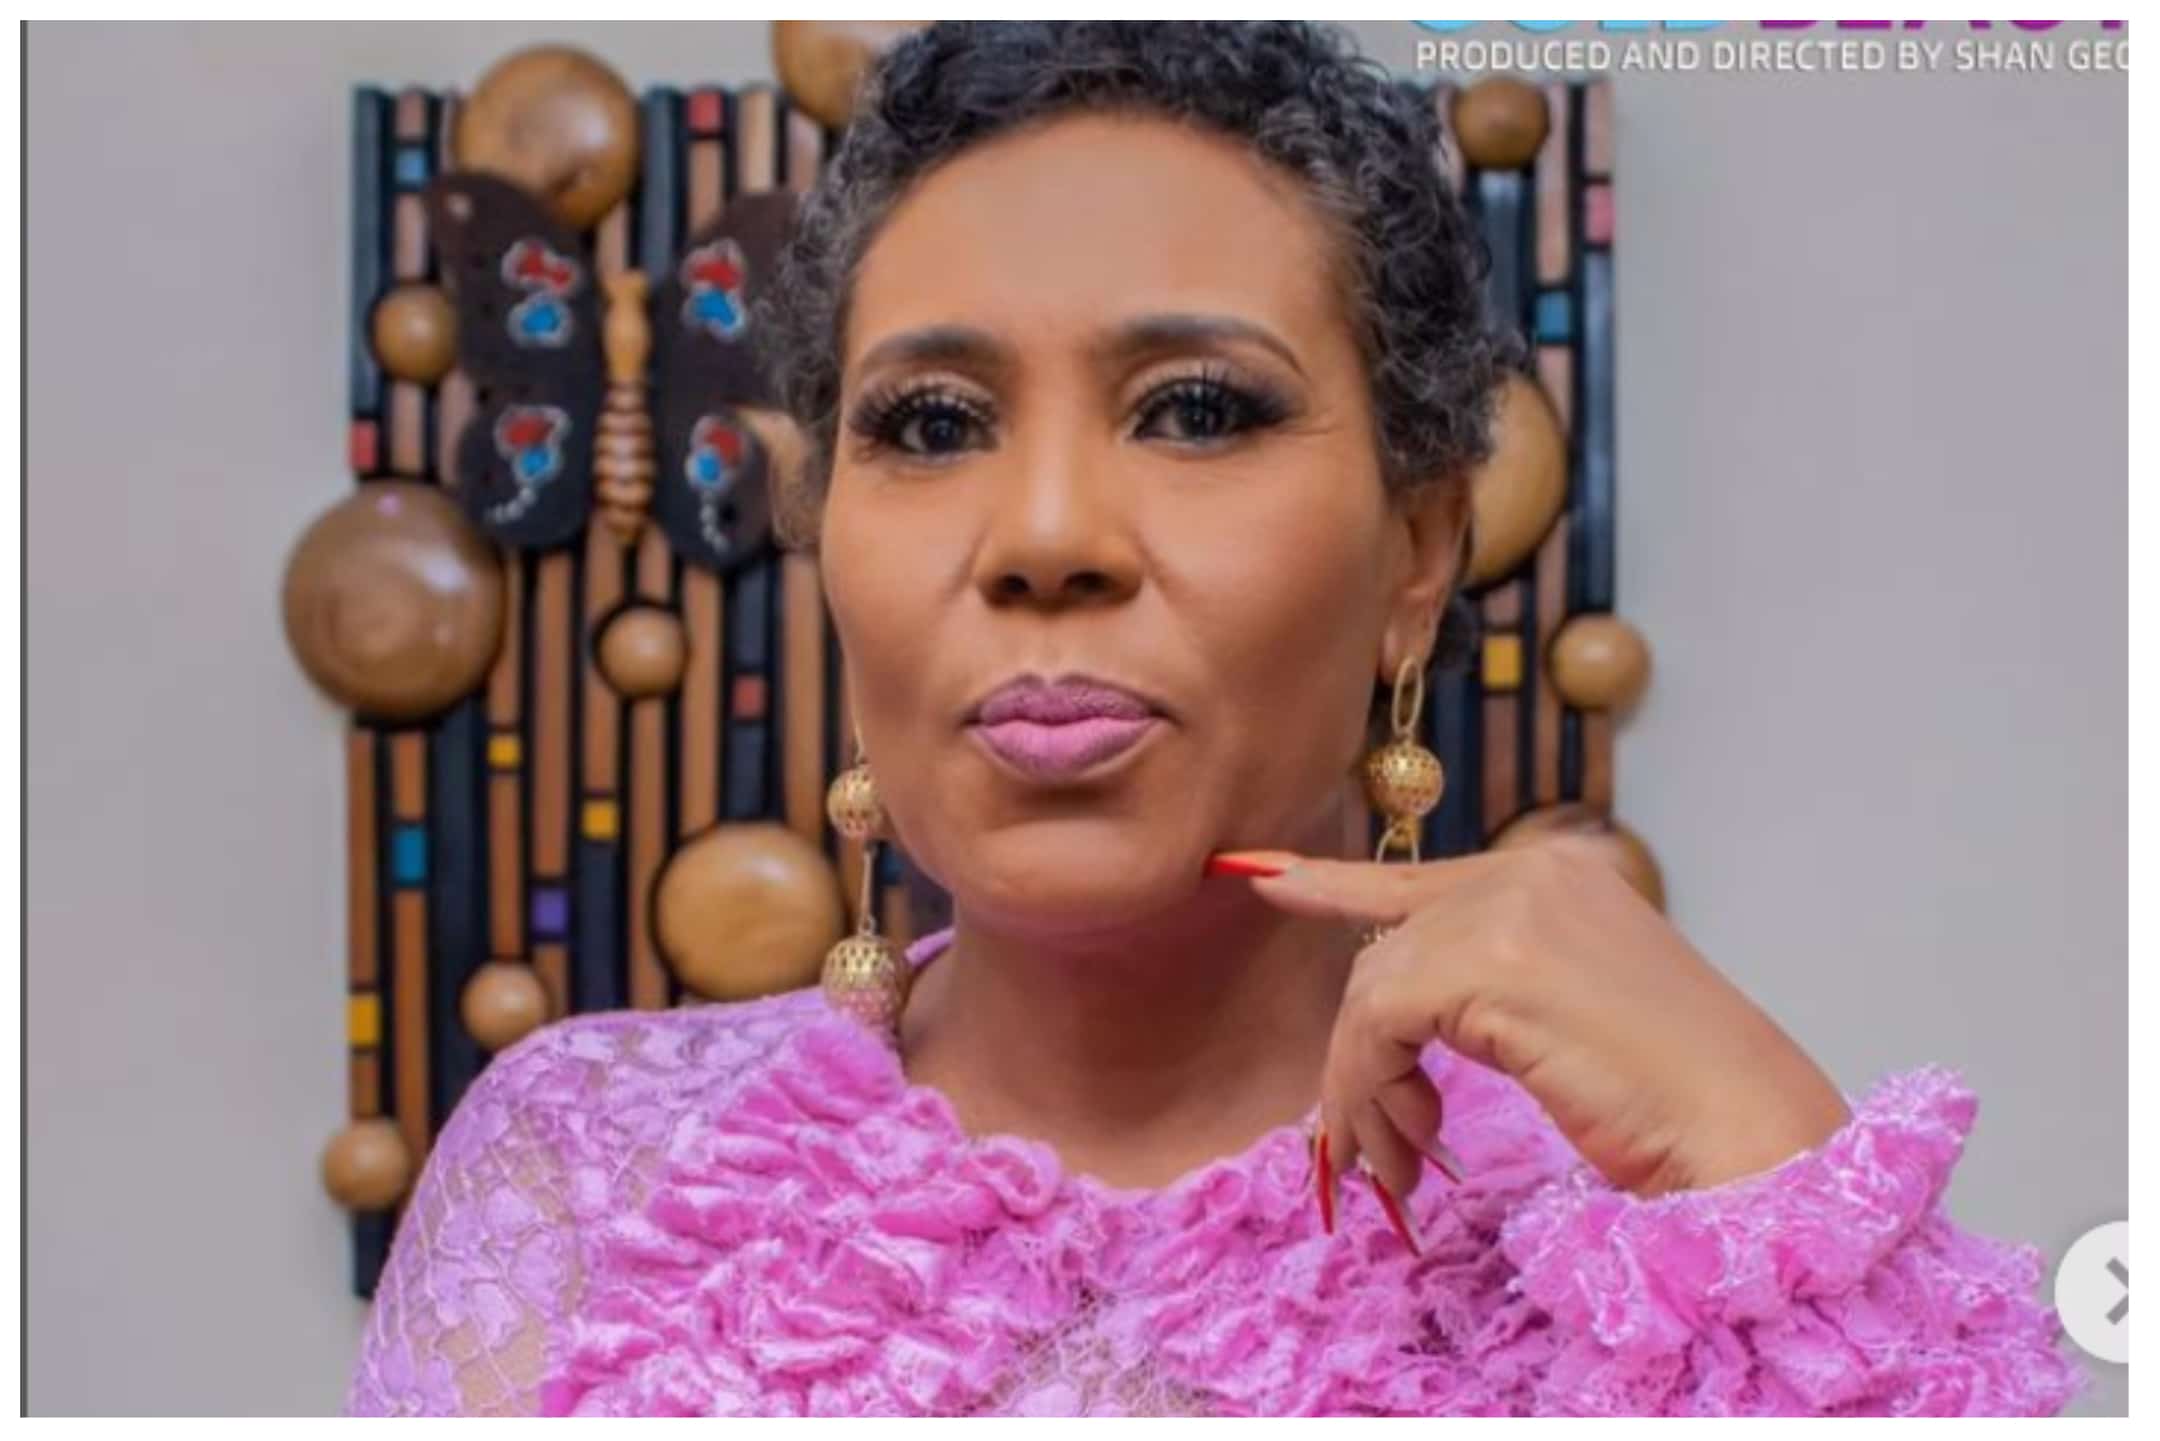 ‘I’m Koboless, ₦3.6 Million Stolen From My BankAccount’ — Nollywood actress Shan George Cried Out